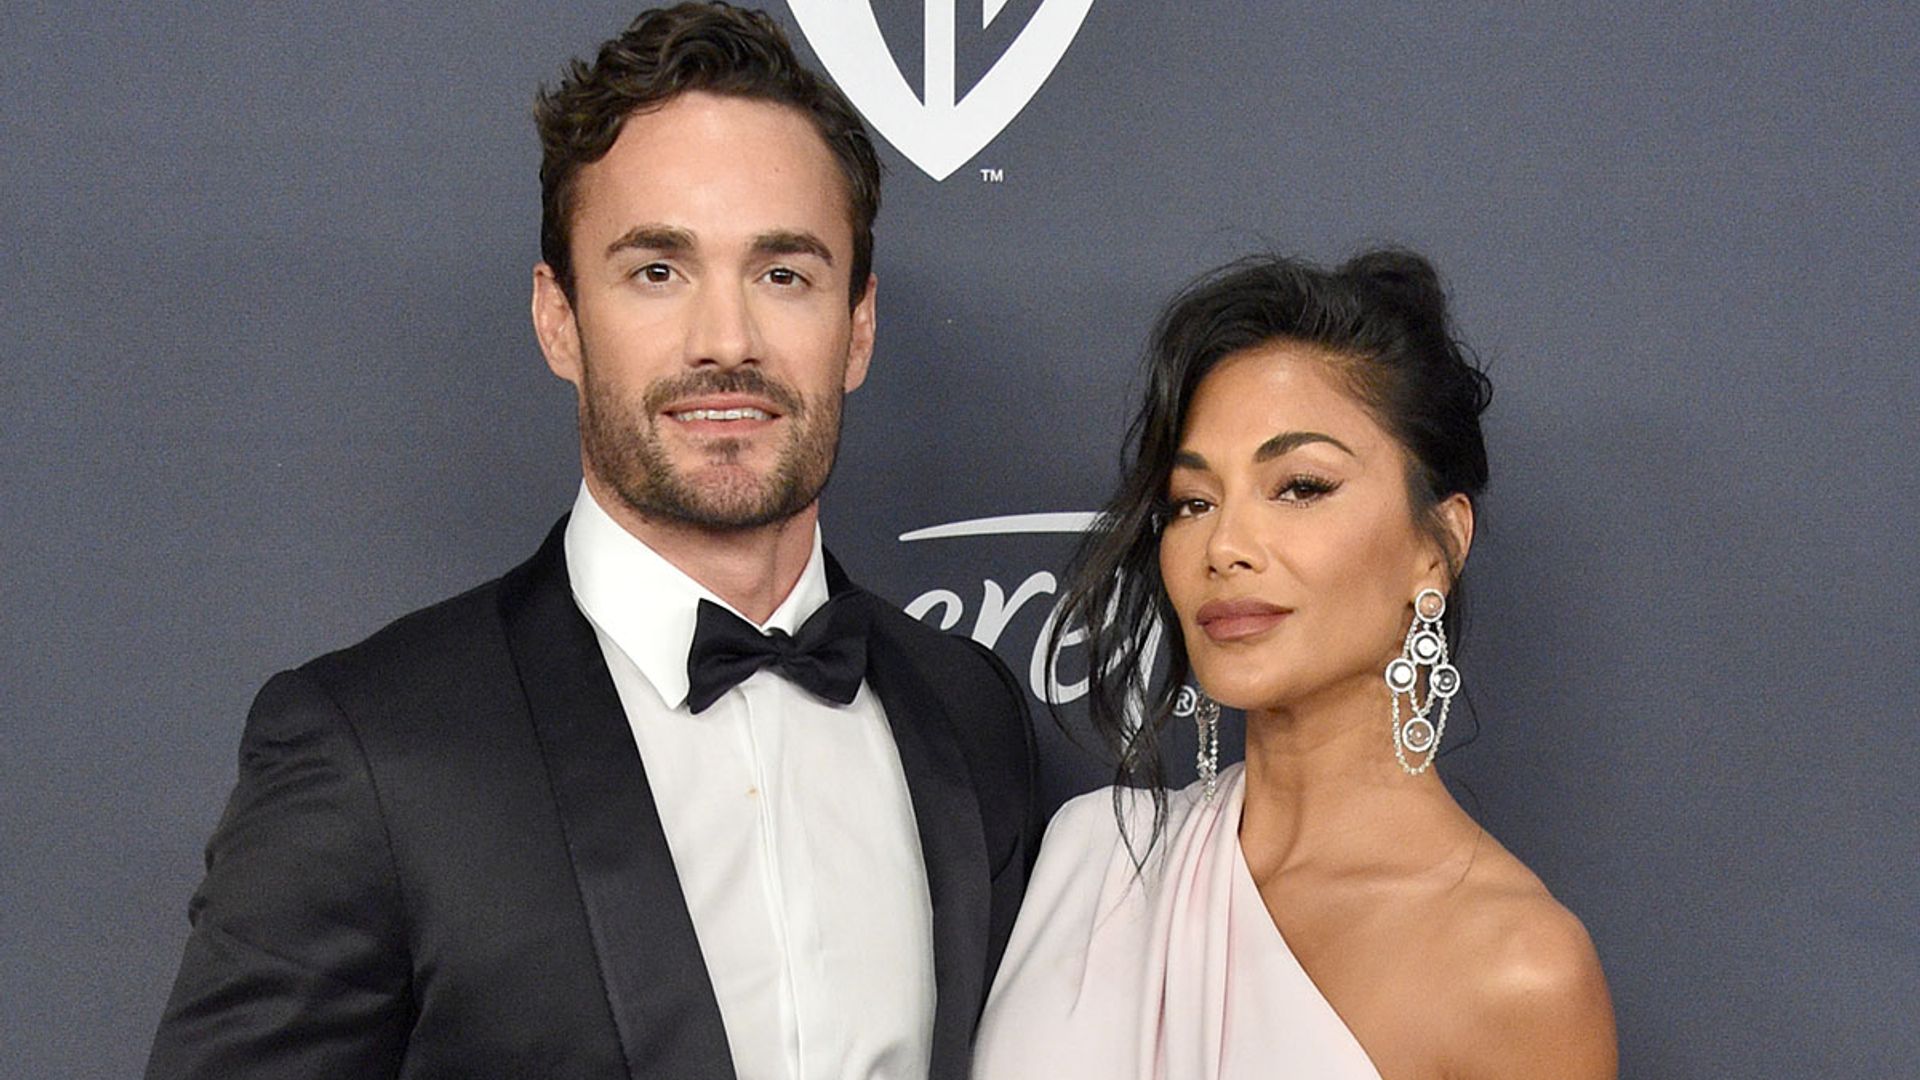 Nicole Scherzinger 41 Looks So Loved Up With New Boyfriend Thom Evans 34 At The Golden Globes Hello Jessica is an actress and an aspiring singer. https www hellomagazine com celebrities 2020010682731 nicole scherzinger loved up new boyfriend thom evans golden globes